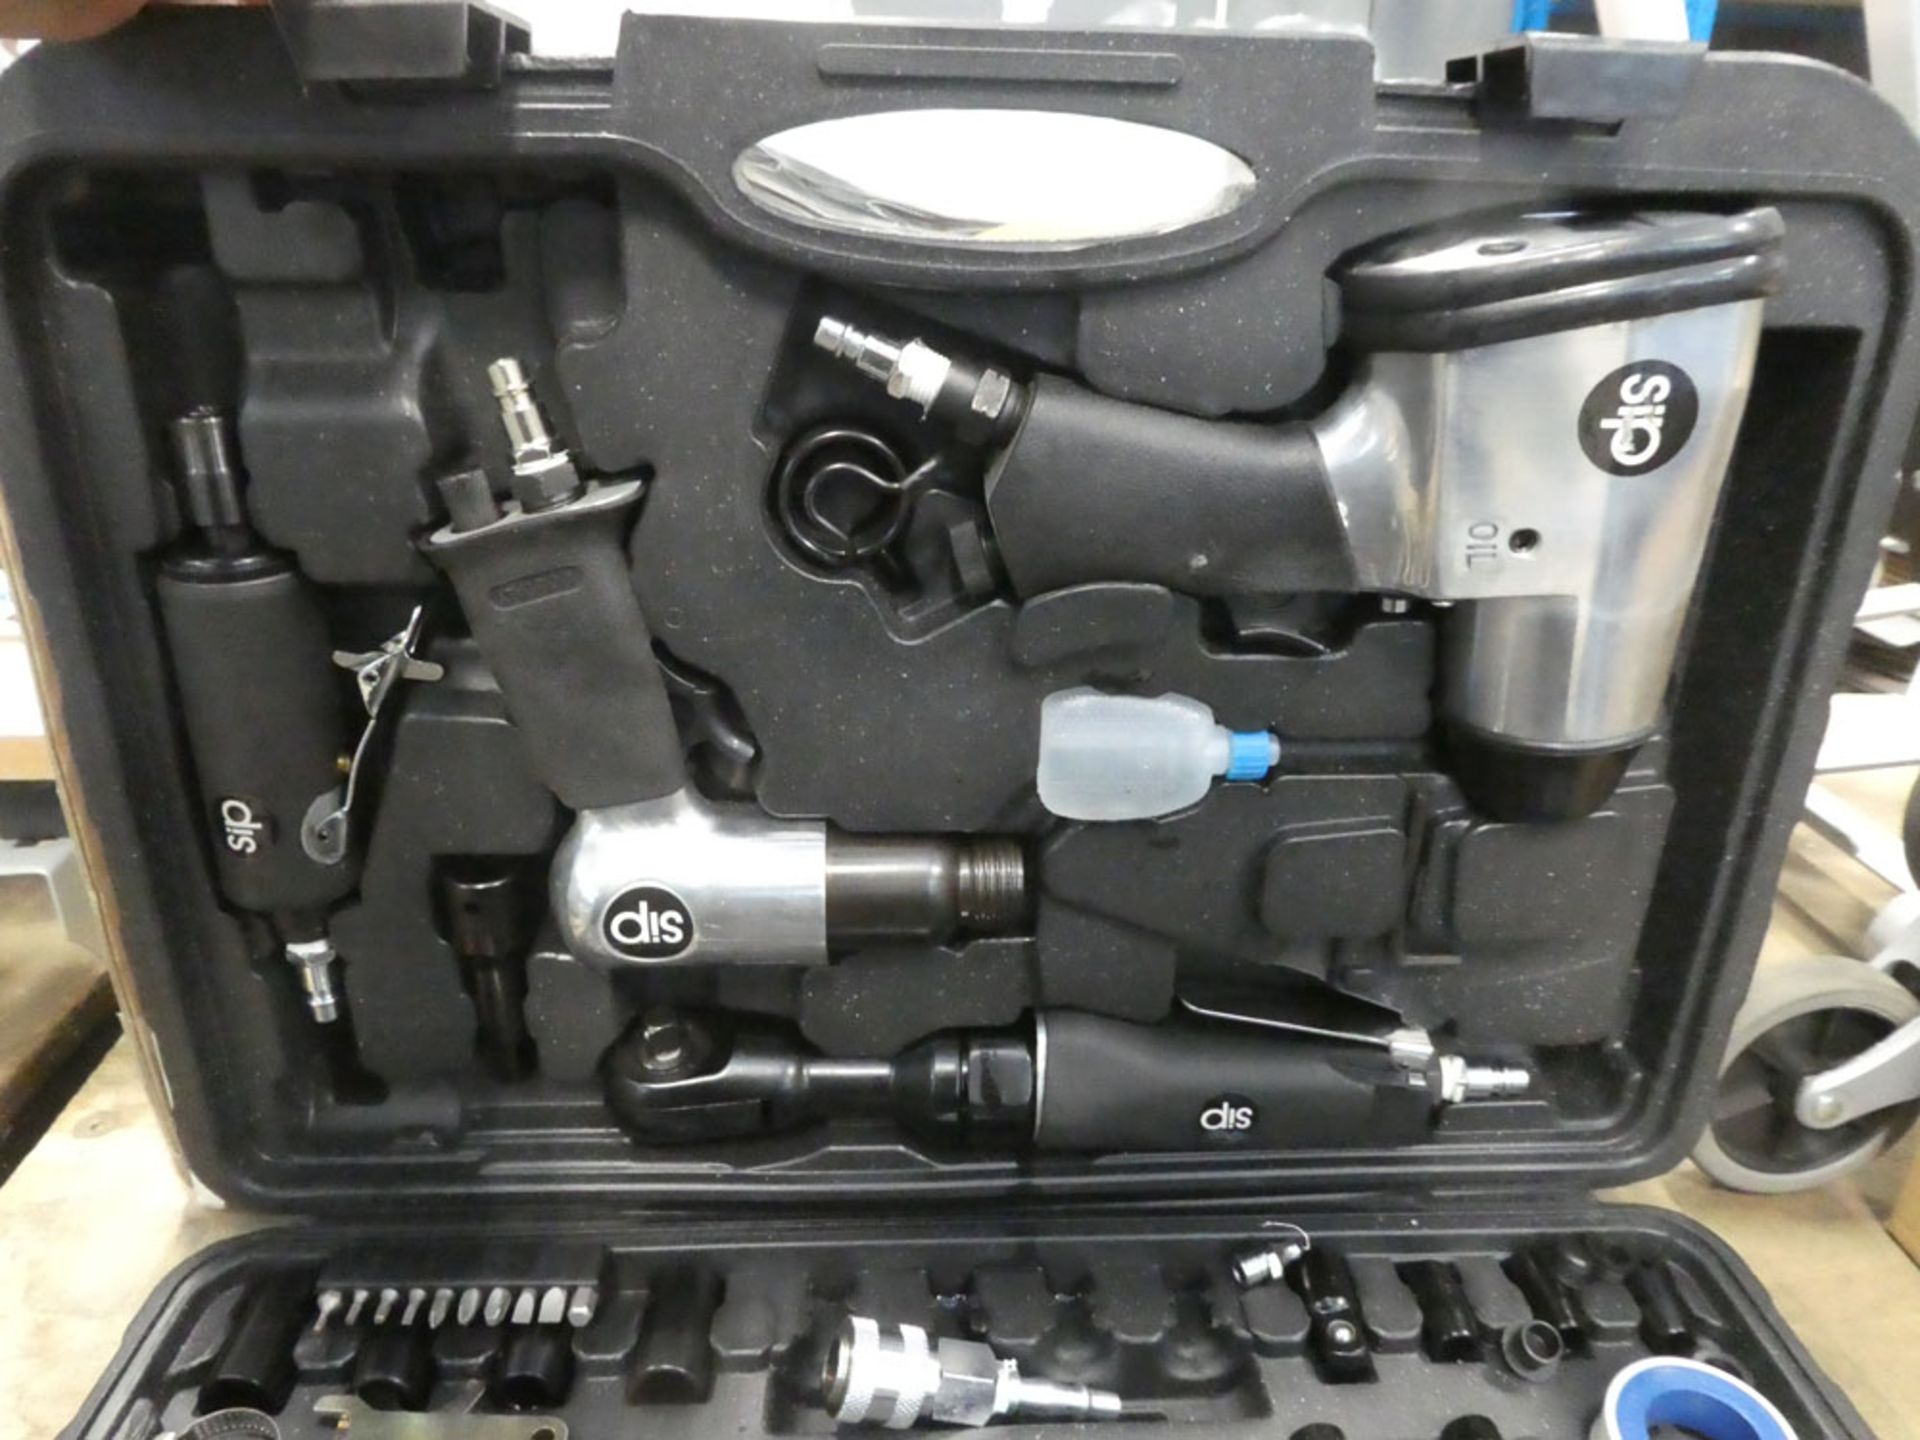 Silverline air tools kit - Image 2 of 3